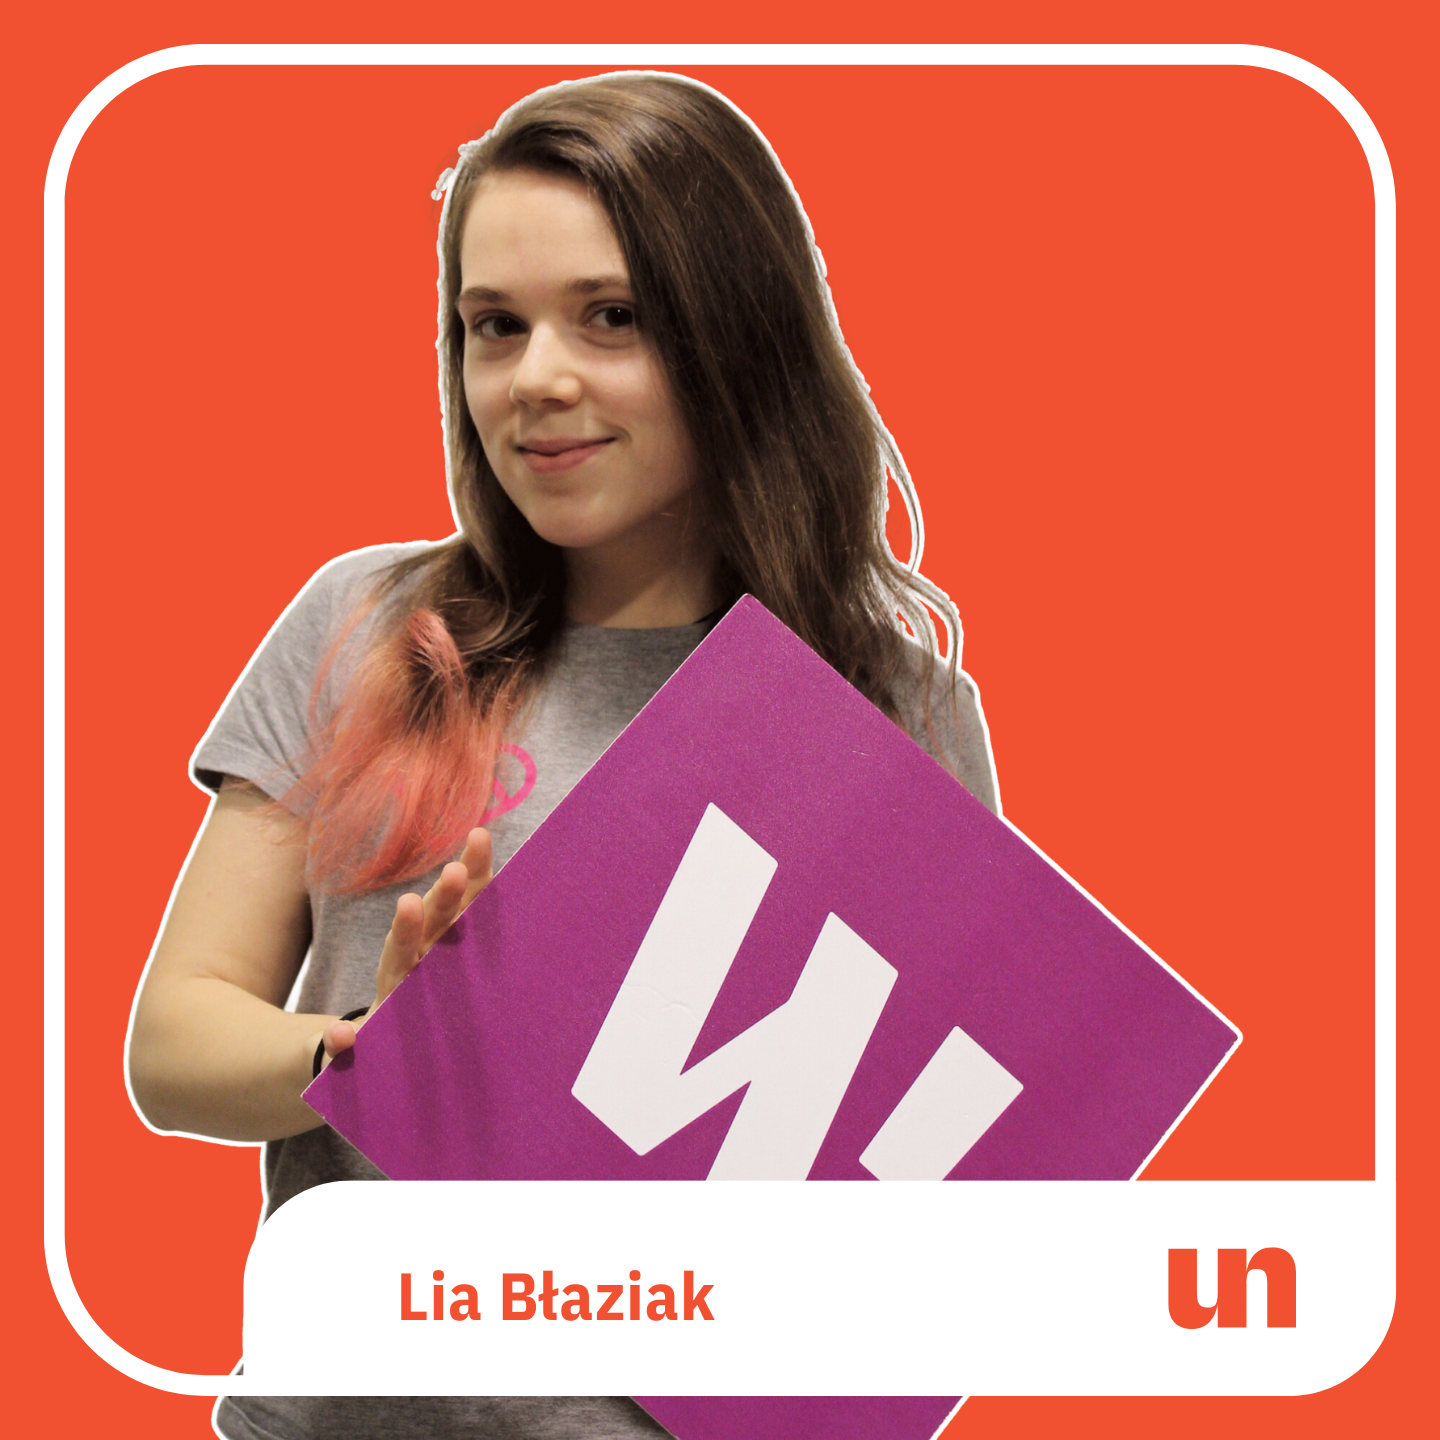 CLICK AND READ MORE ABOUT LIA